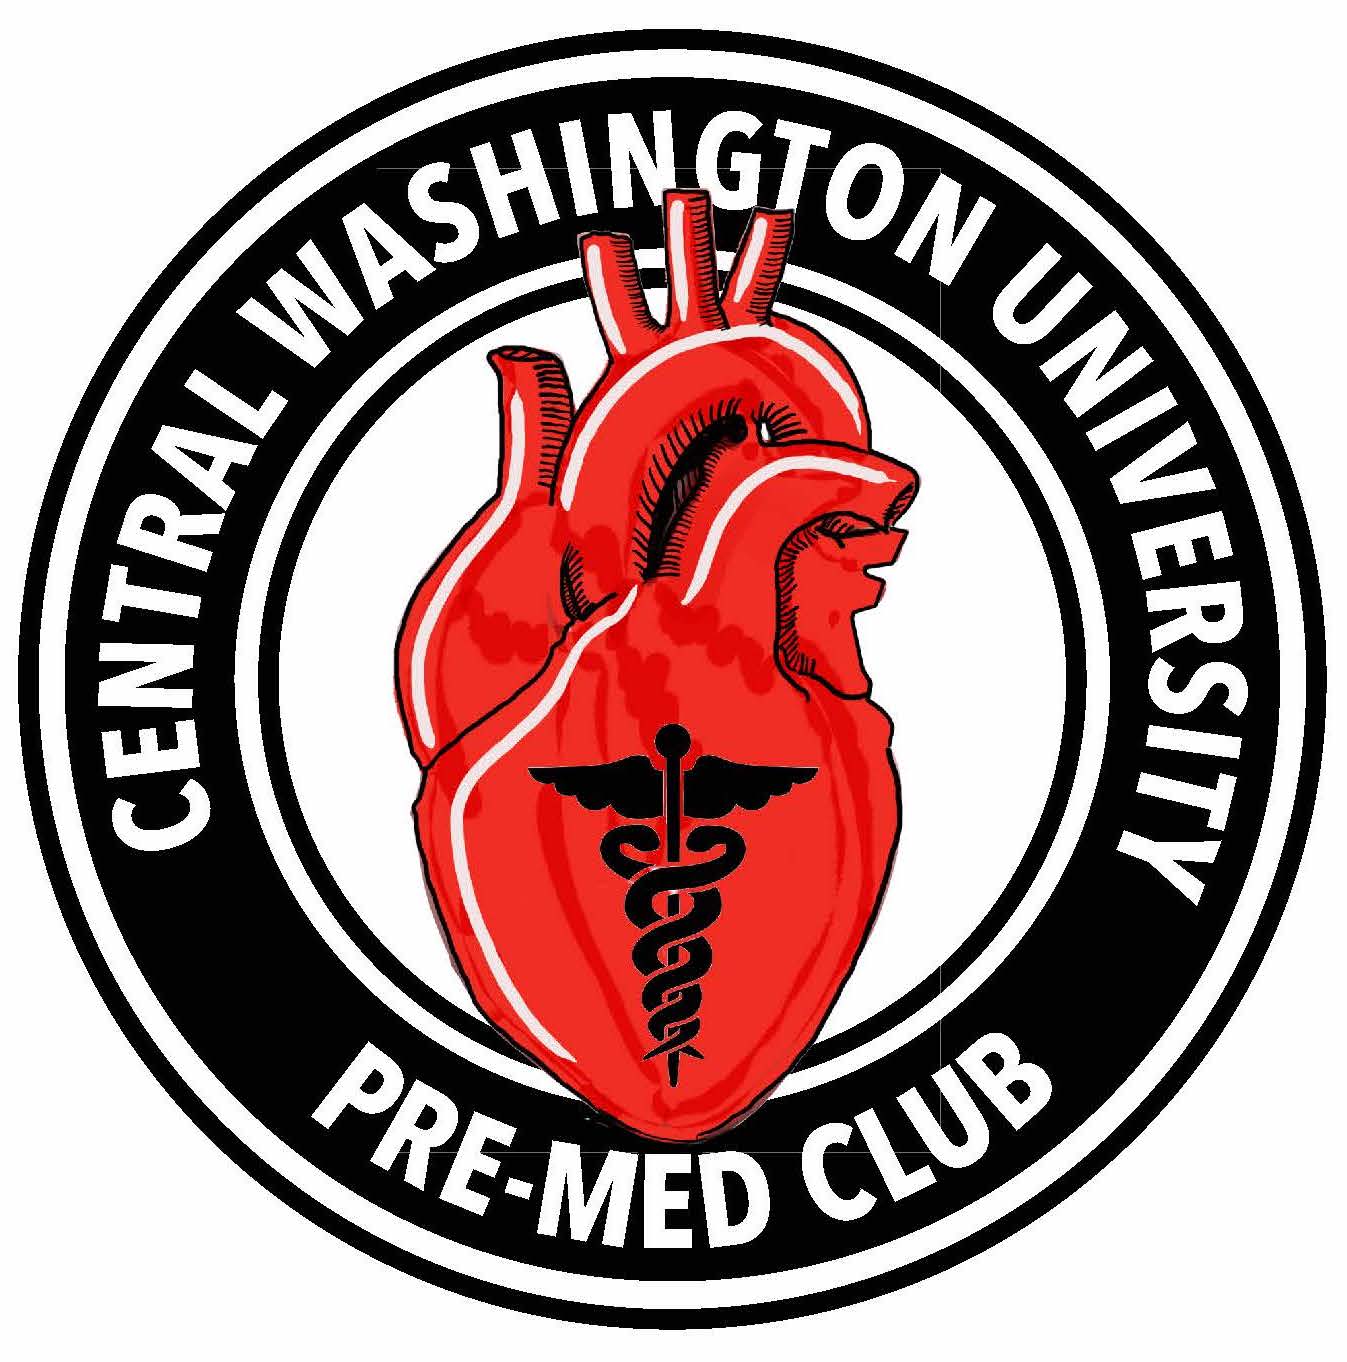 A red, realistic heart with a caduceus symbol on it, sits in the middle of a black circle with the words "Central Washington University Pre-Med Club" encircling the black circle.